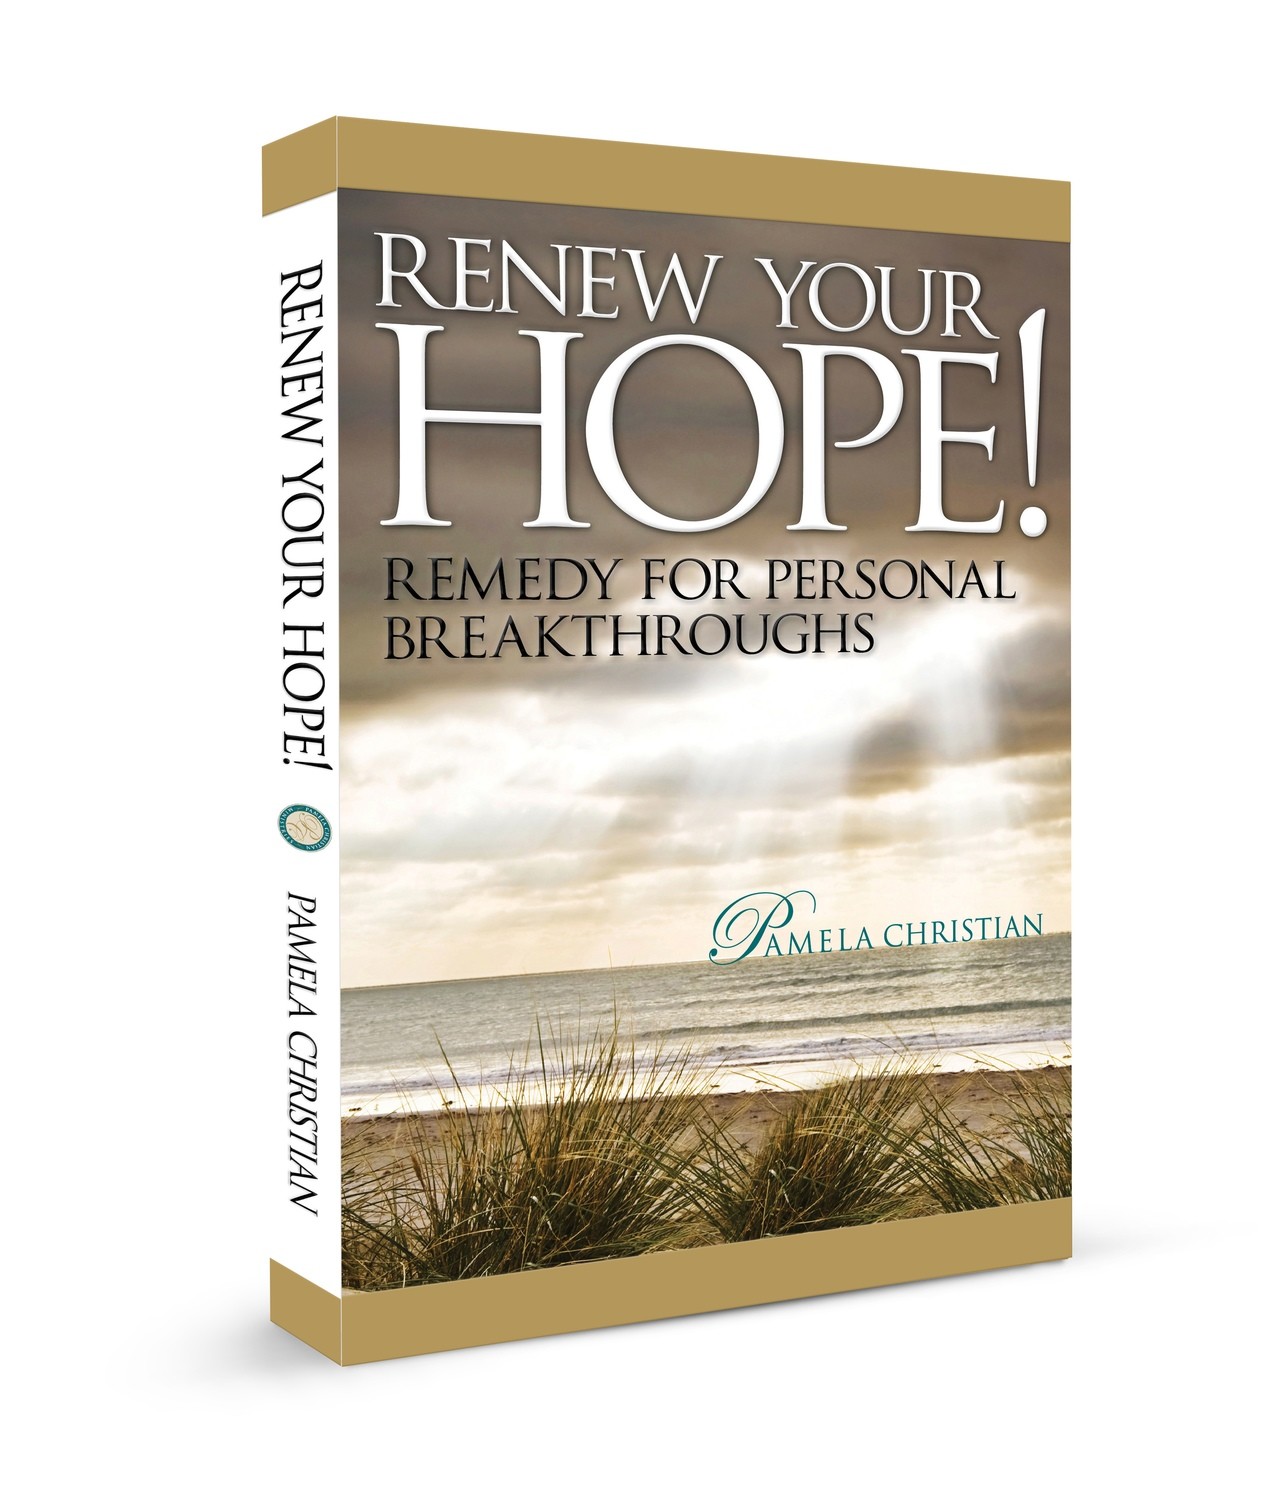 Renew Your Hope! Remedy for Personal Breakthroughs - Print